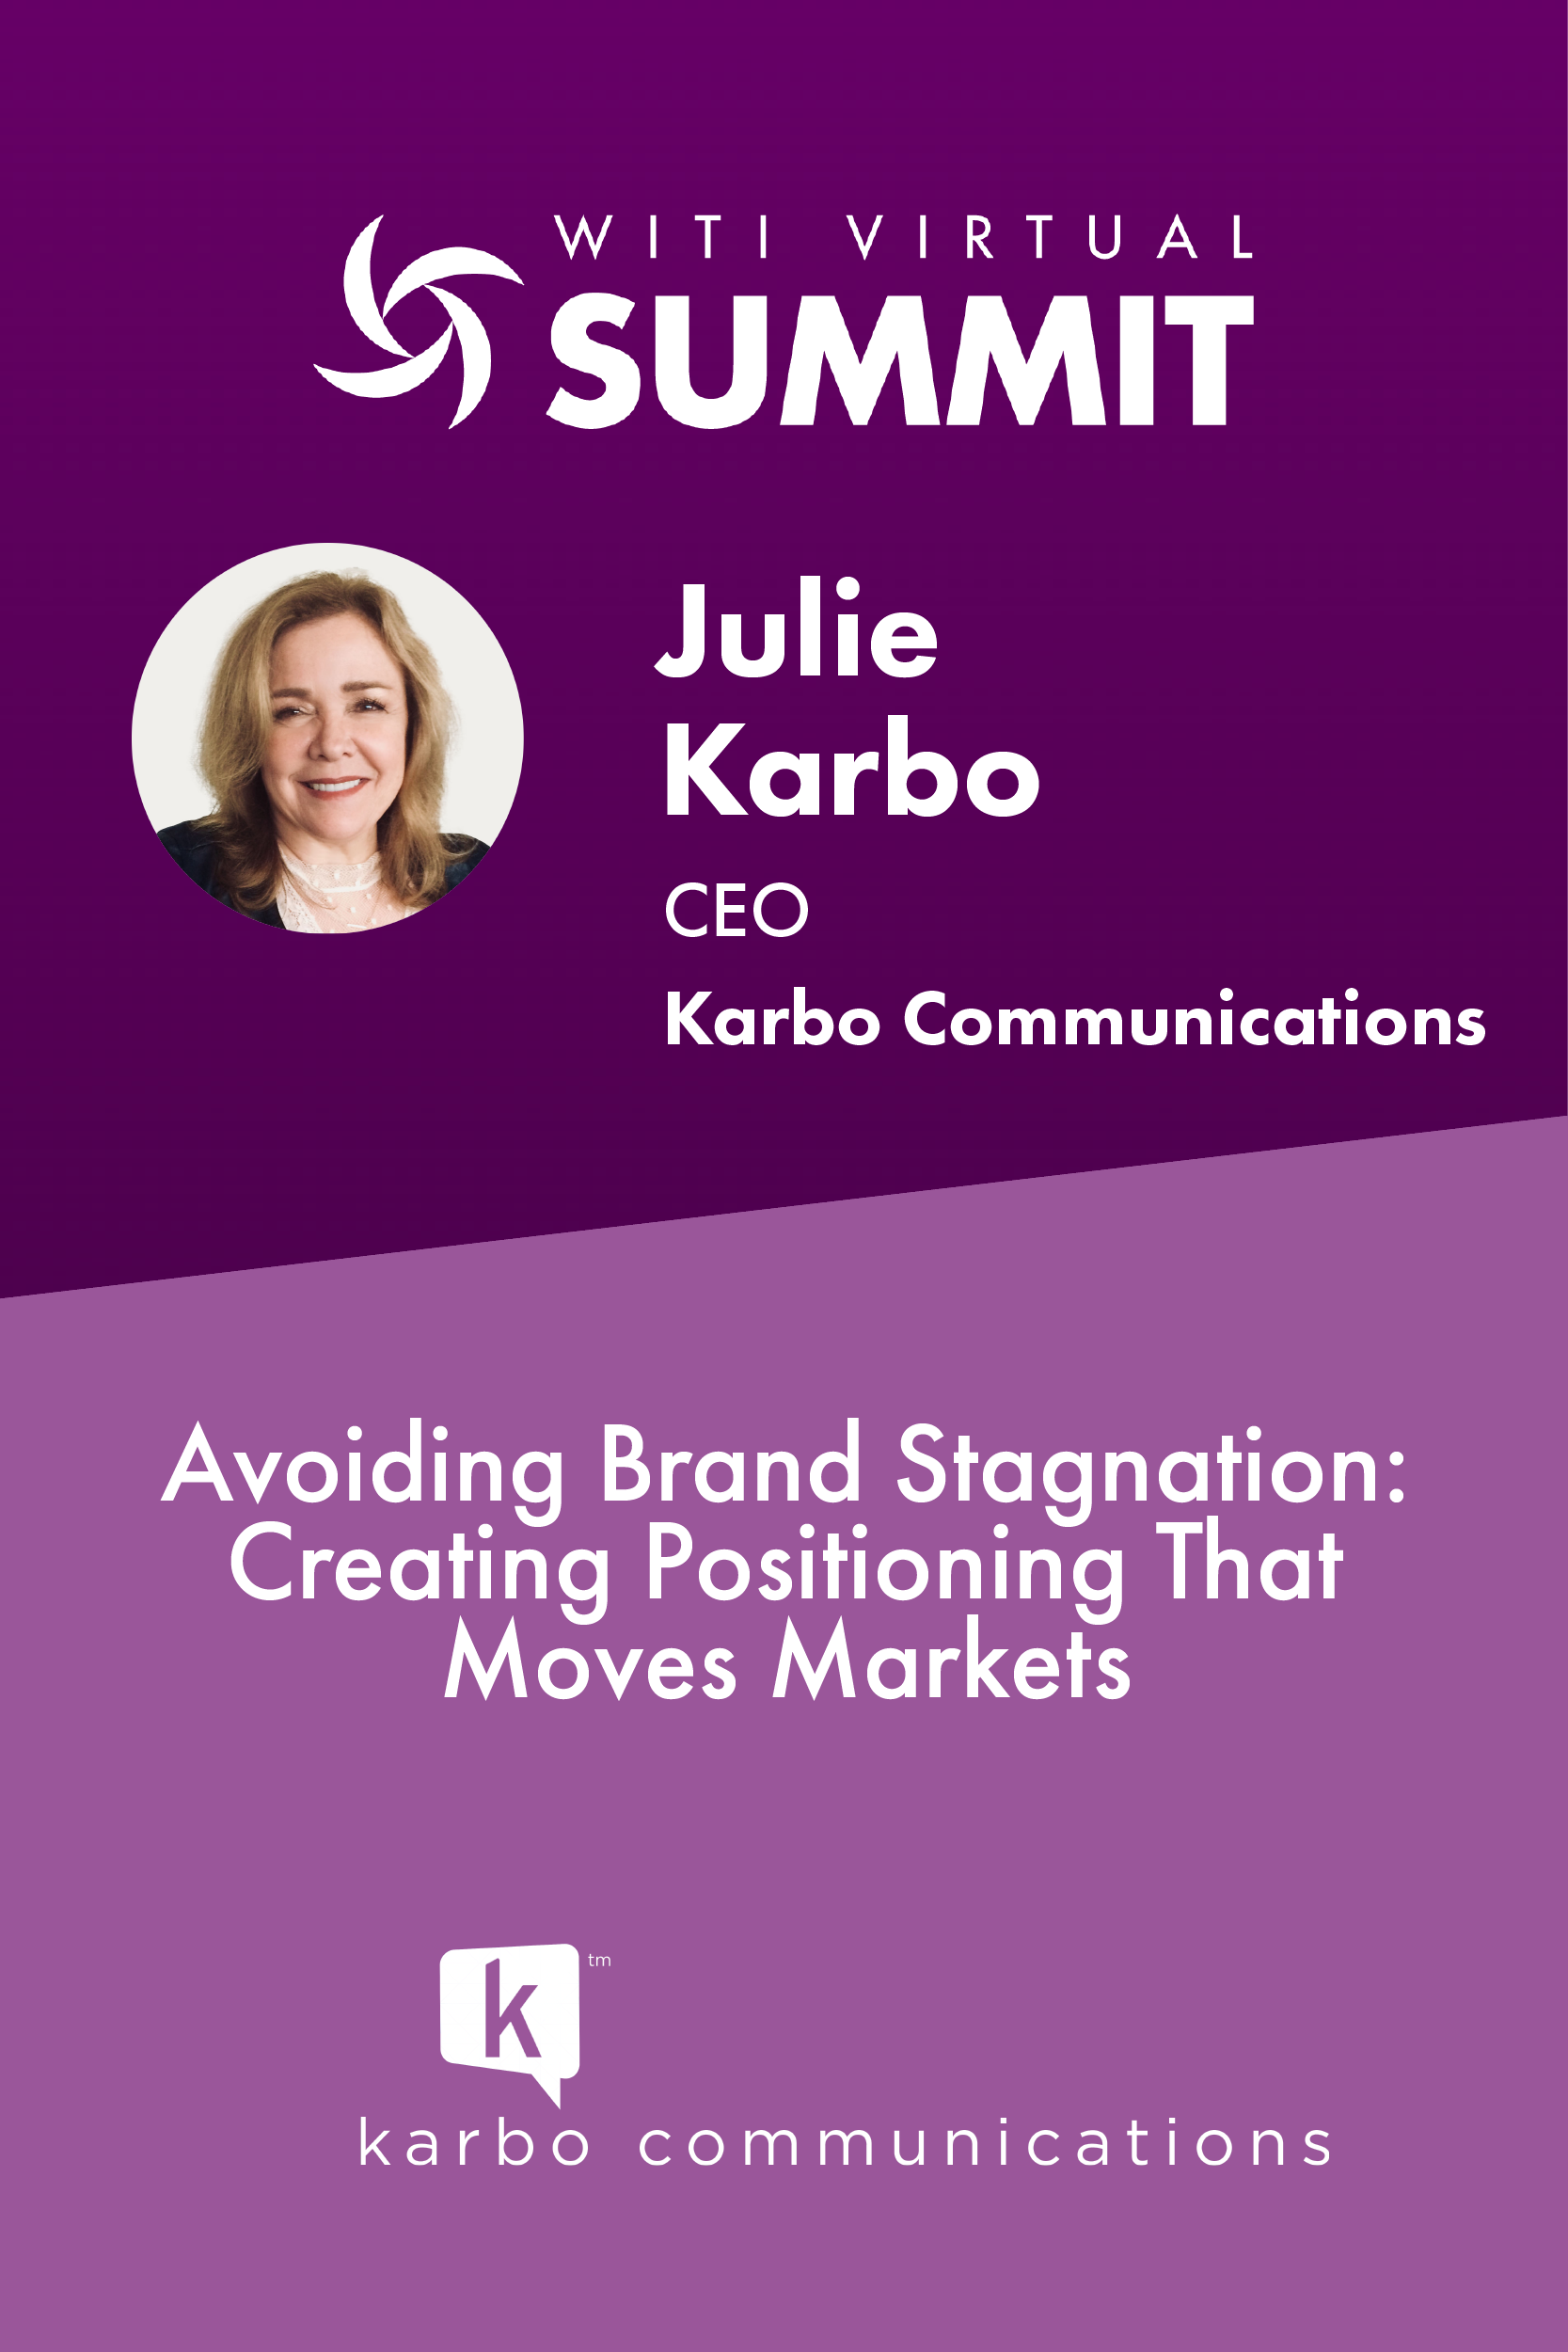 WITI Virtual Summit Banner for Julie Karbo's presentation on "Creating Positioning That Moves Markets"